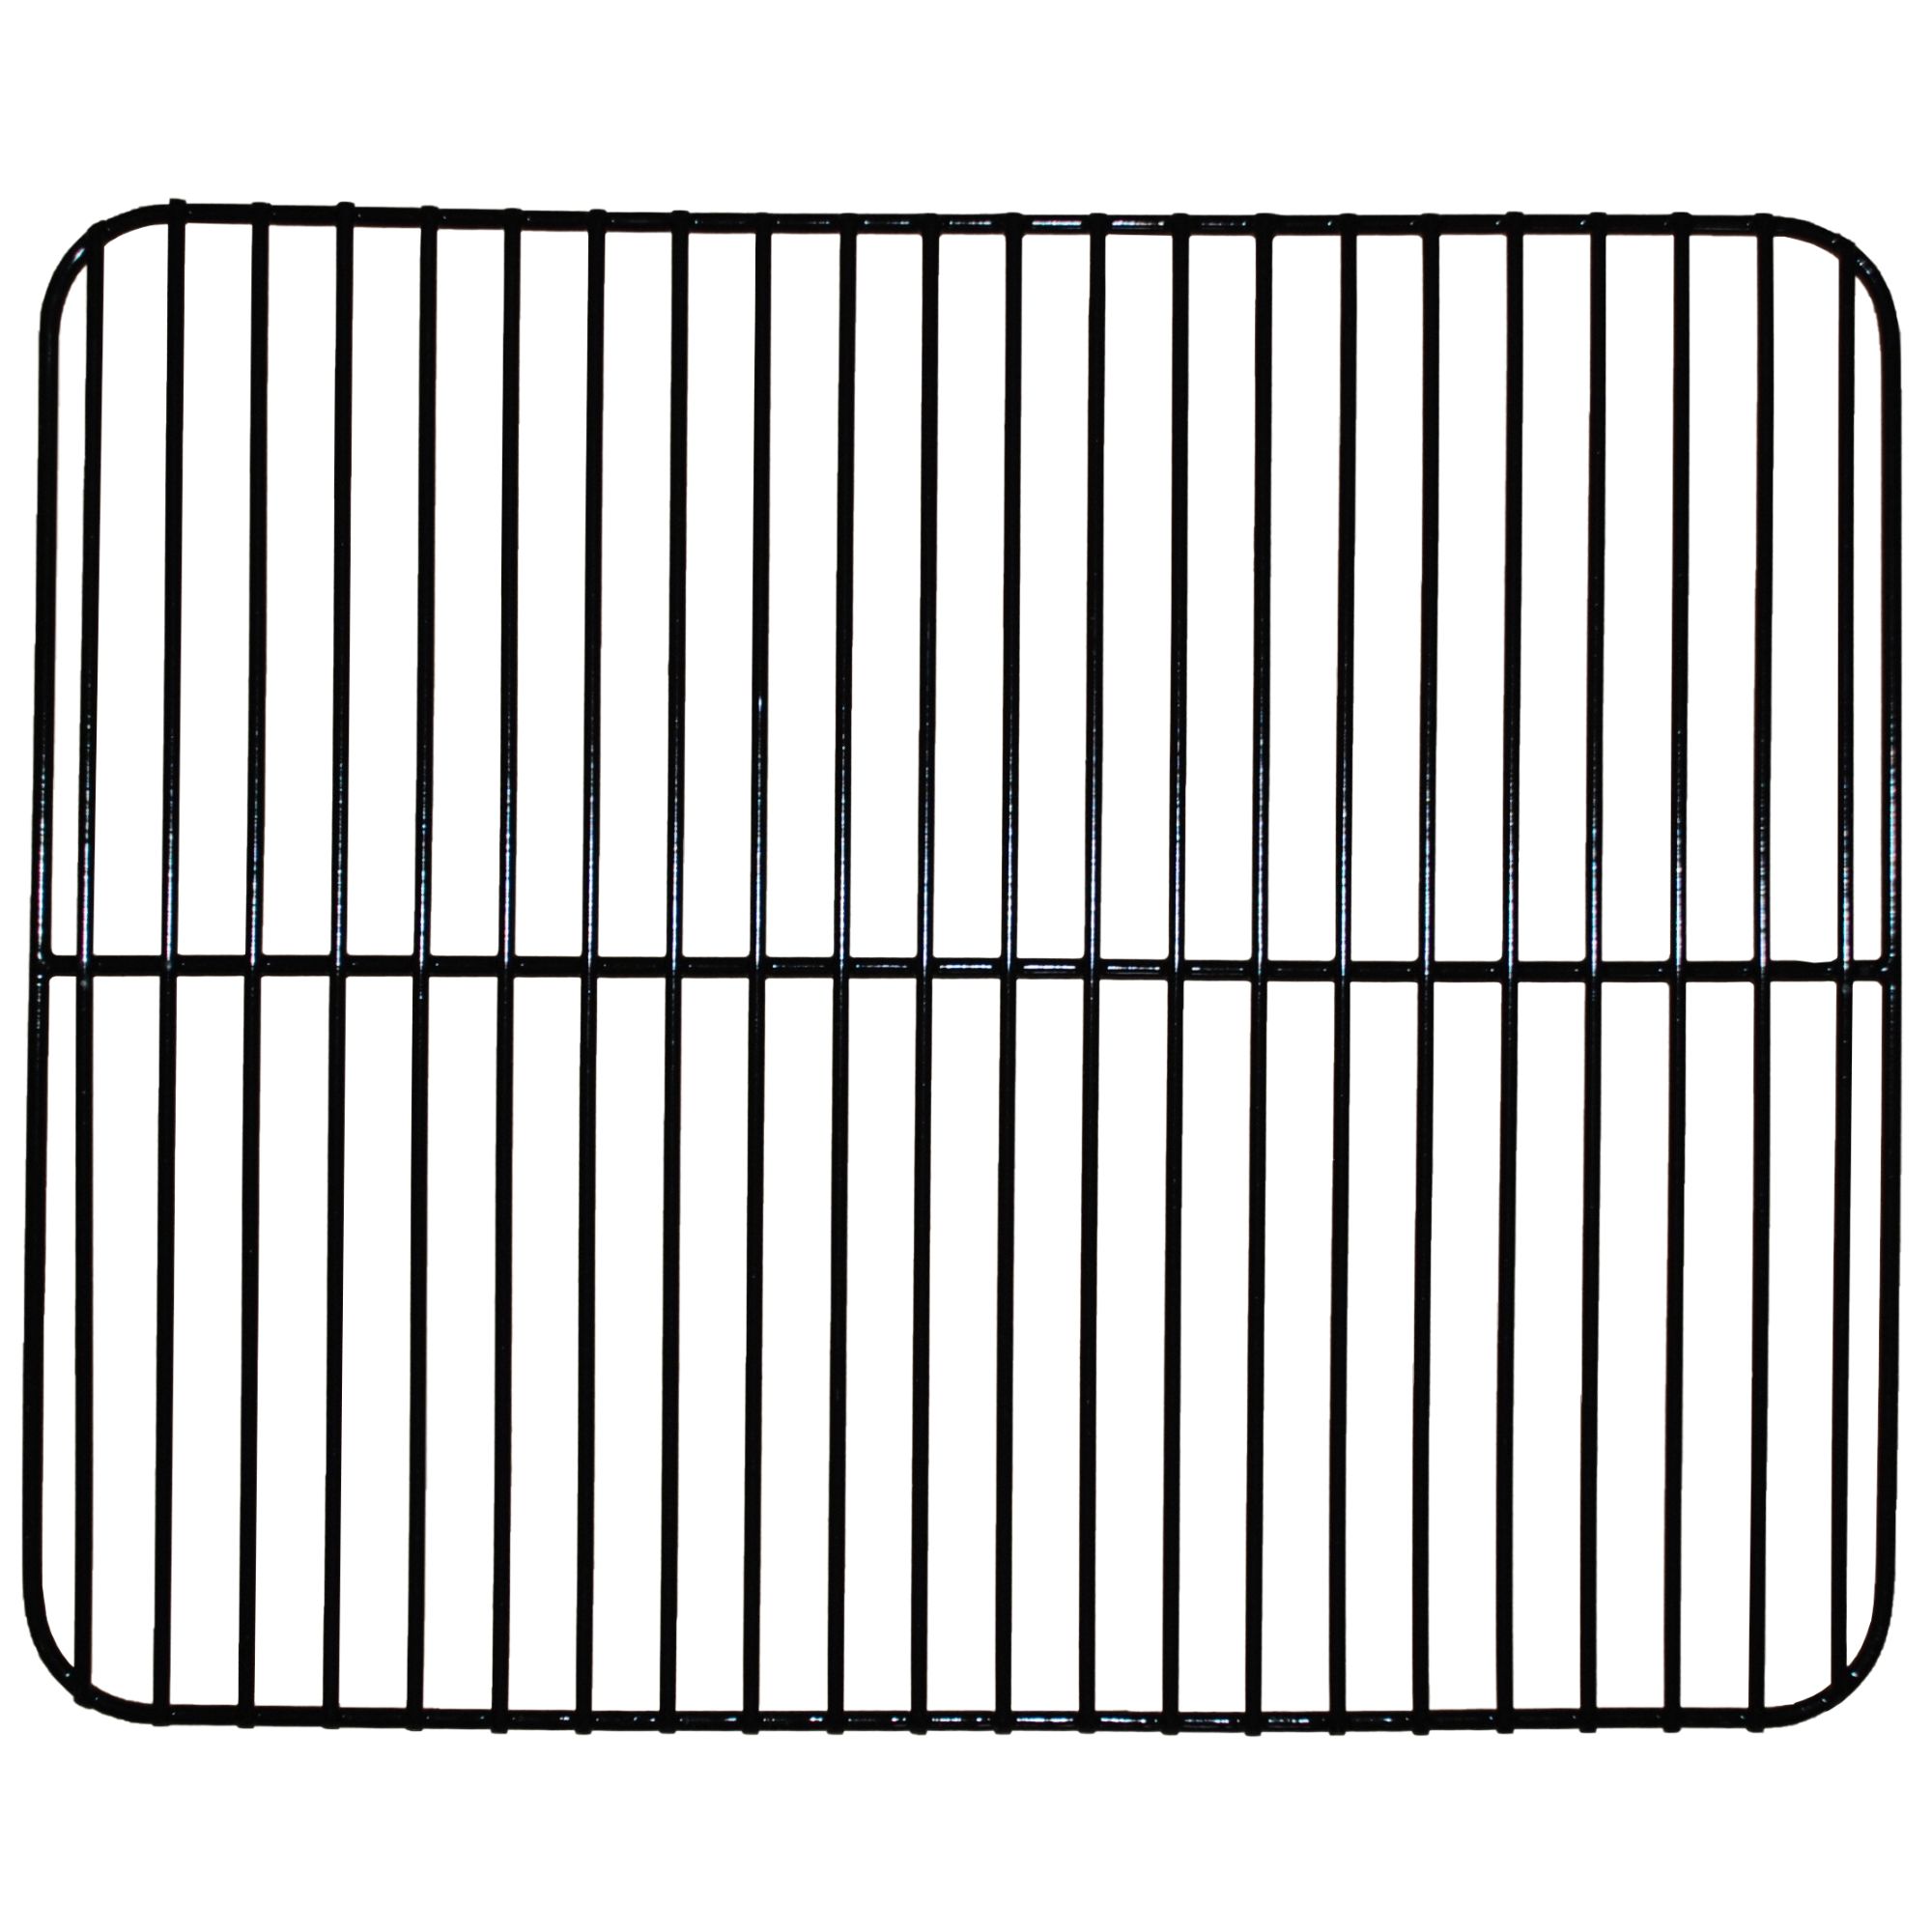 Porcelain steel wire cooking grid for Charbroil, Outdoor Gourmet brand gas grills